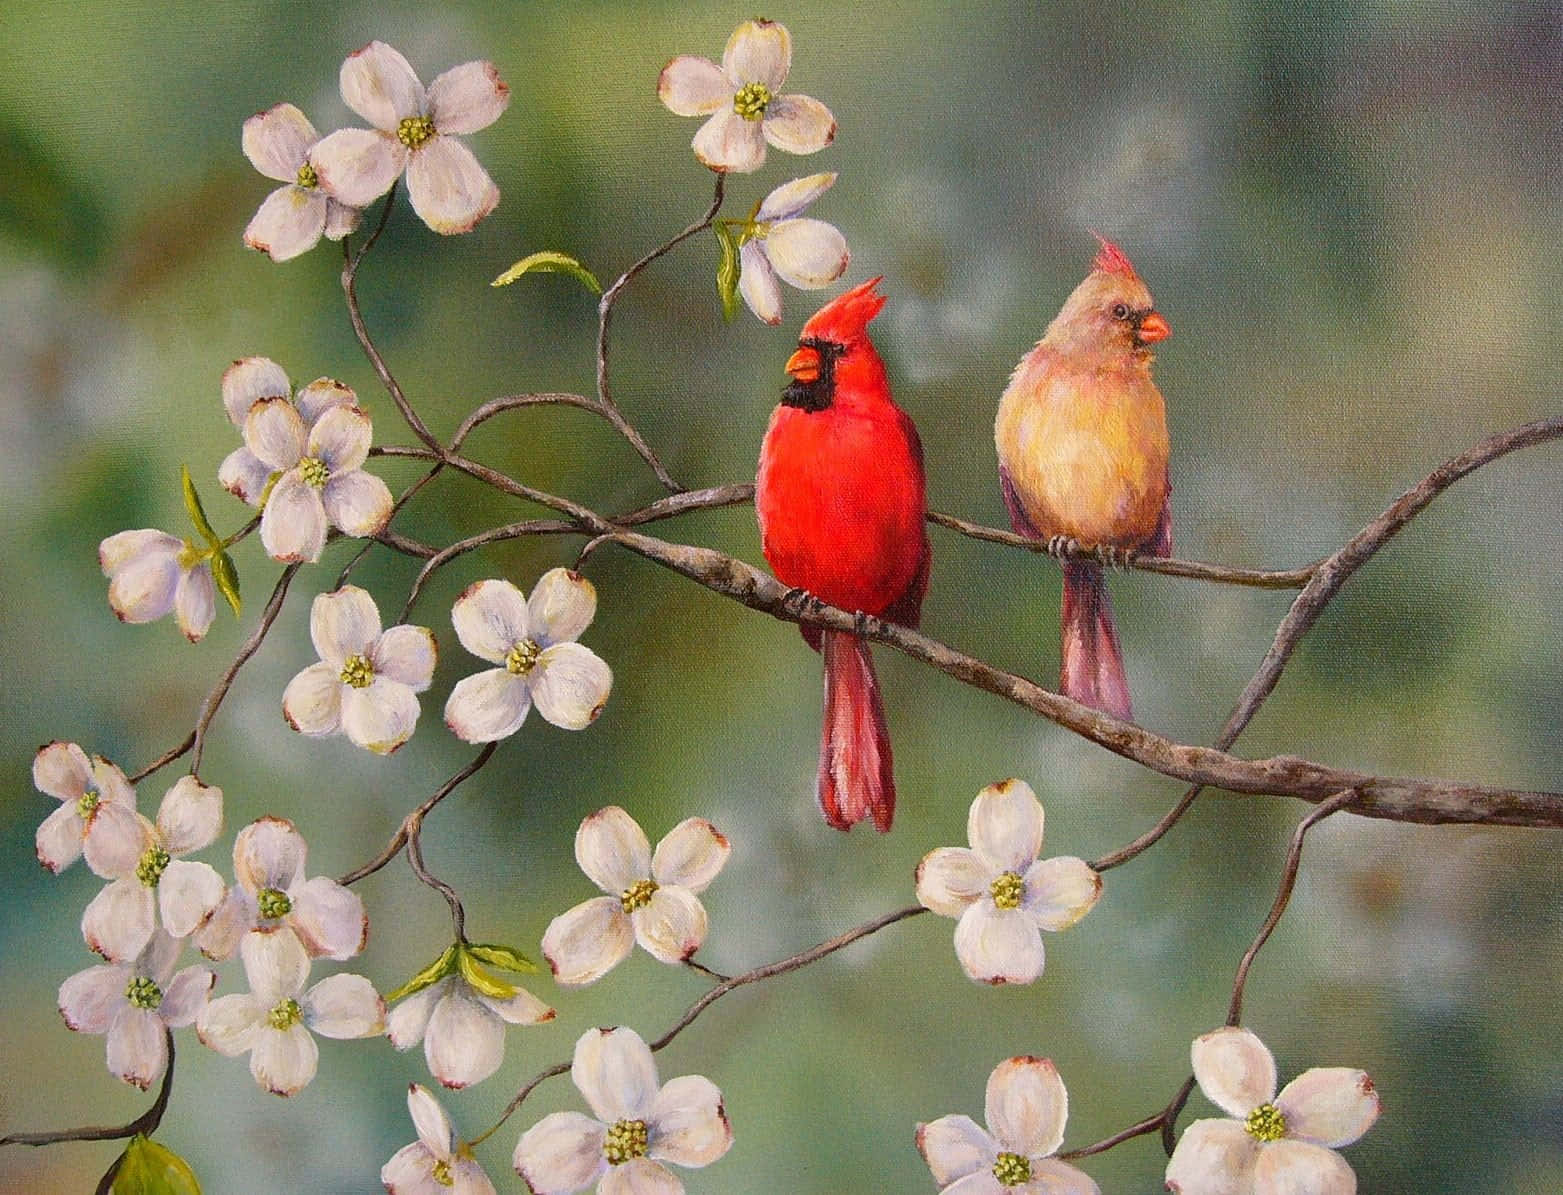 Cardinal Brings Vibrant Colors to Your Garden